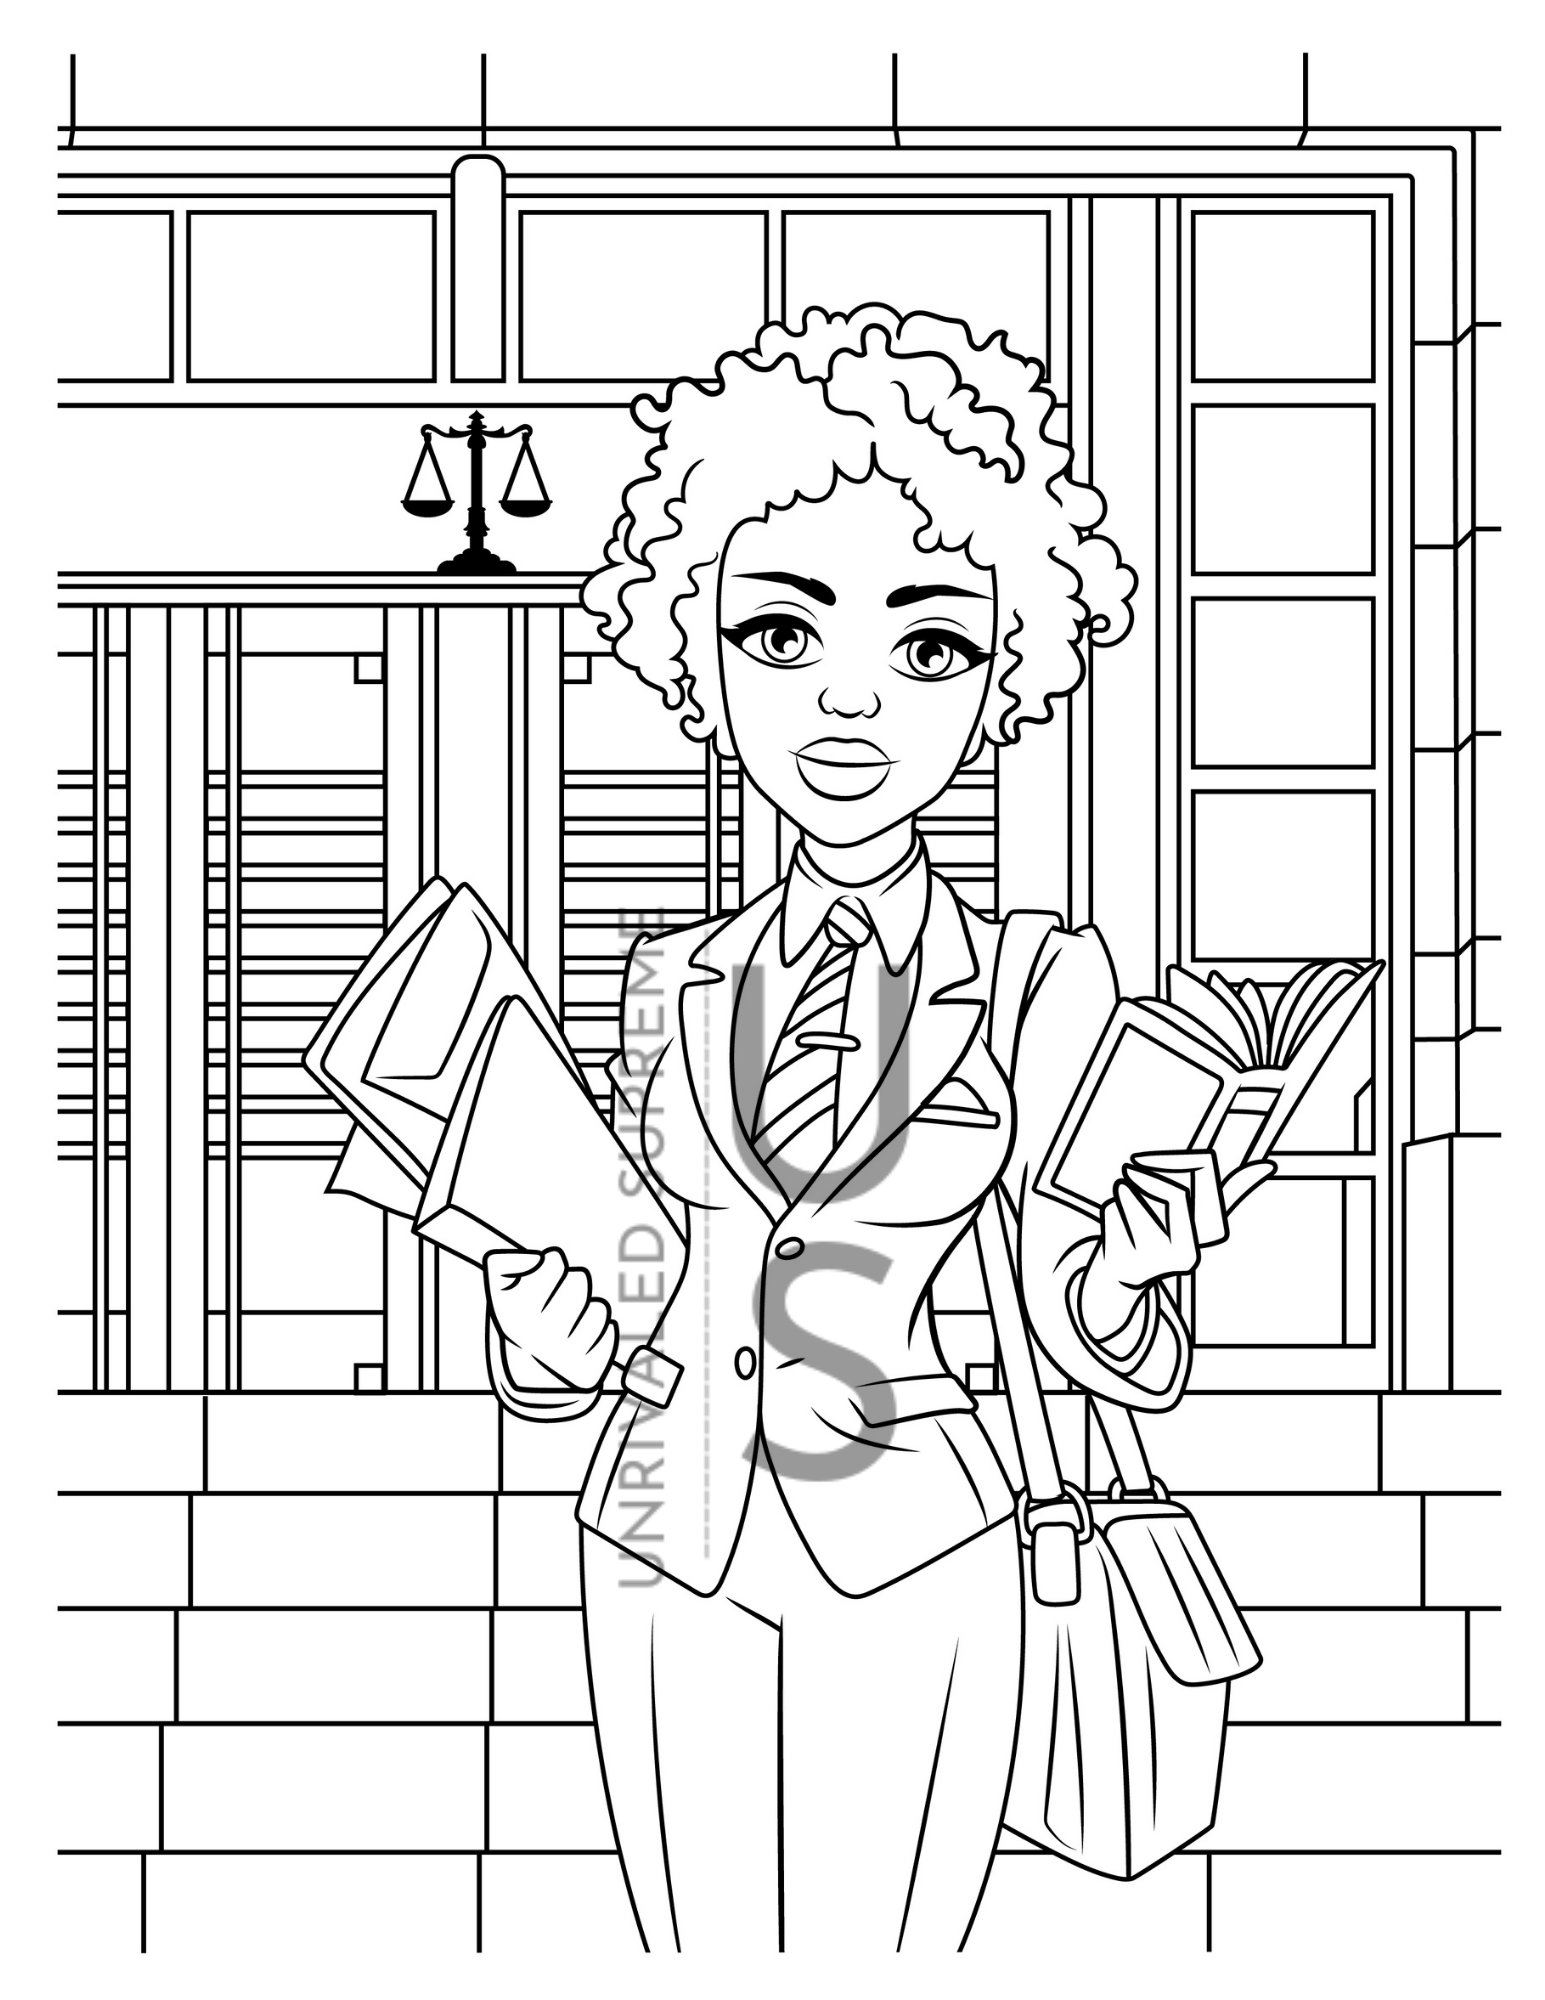 Lawyer coloring page kids coloring page kids coloring sheet adult coloring page printable activity print coloring download now